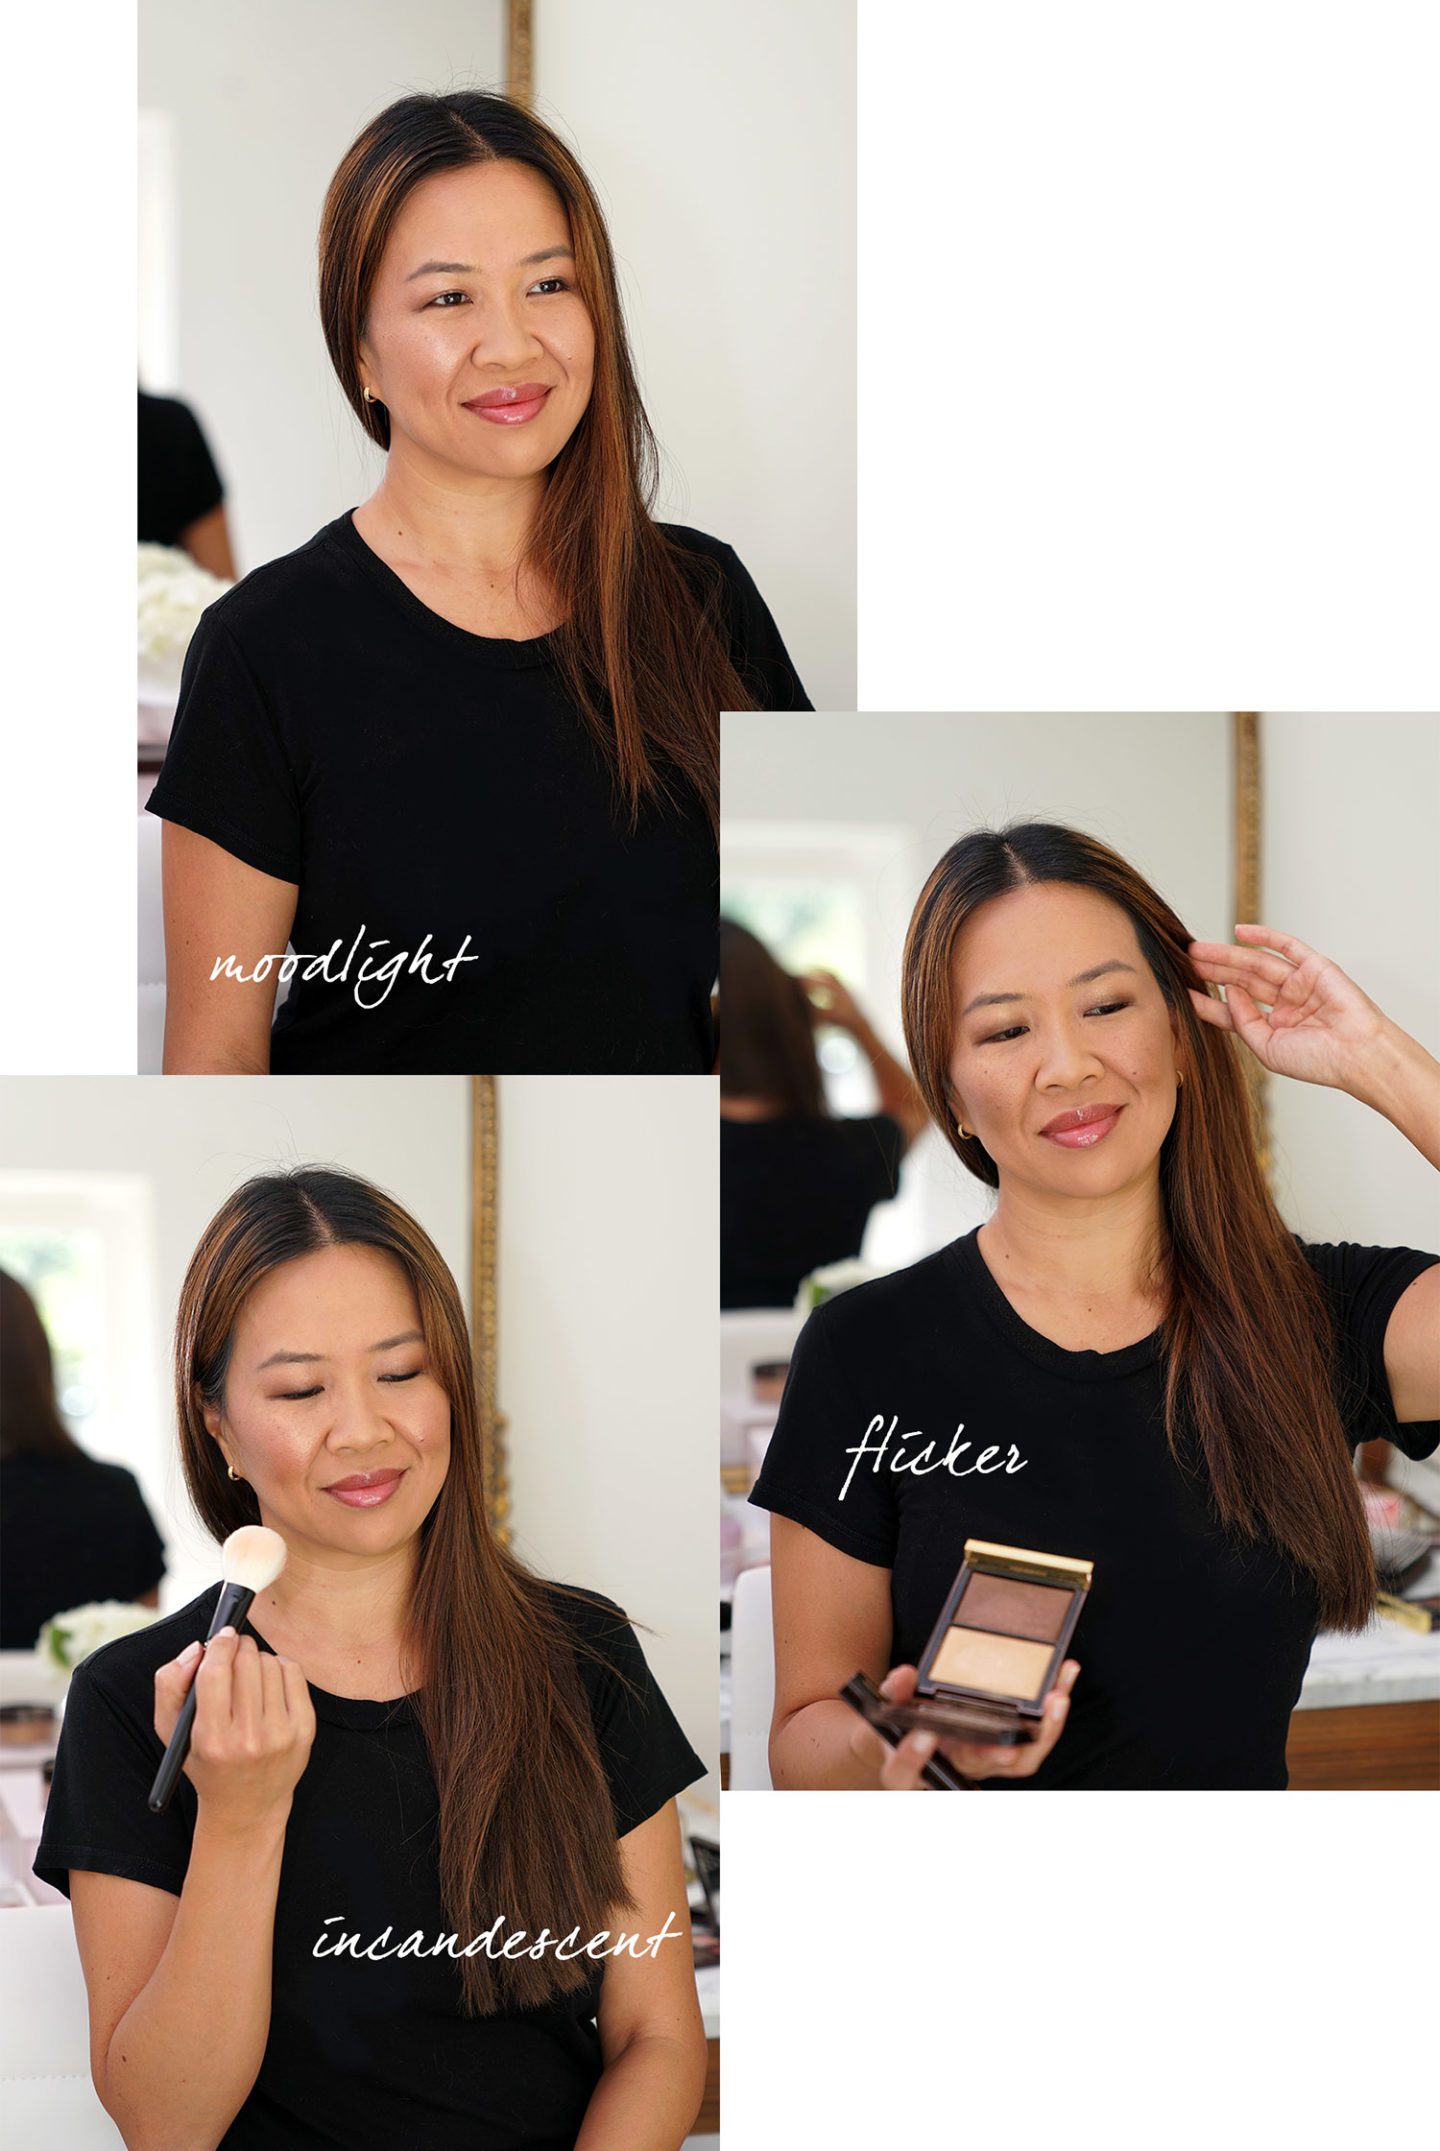 Tom Ford Skin Illuminating Duo: Moodlight, Flicker and Incandescent makeup looks face swatches